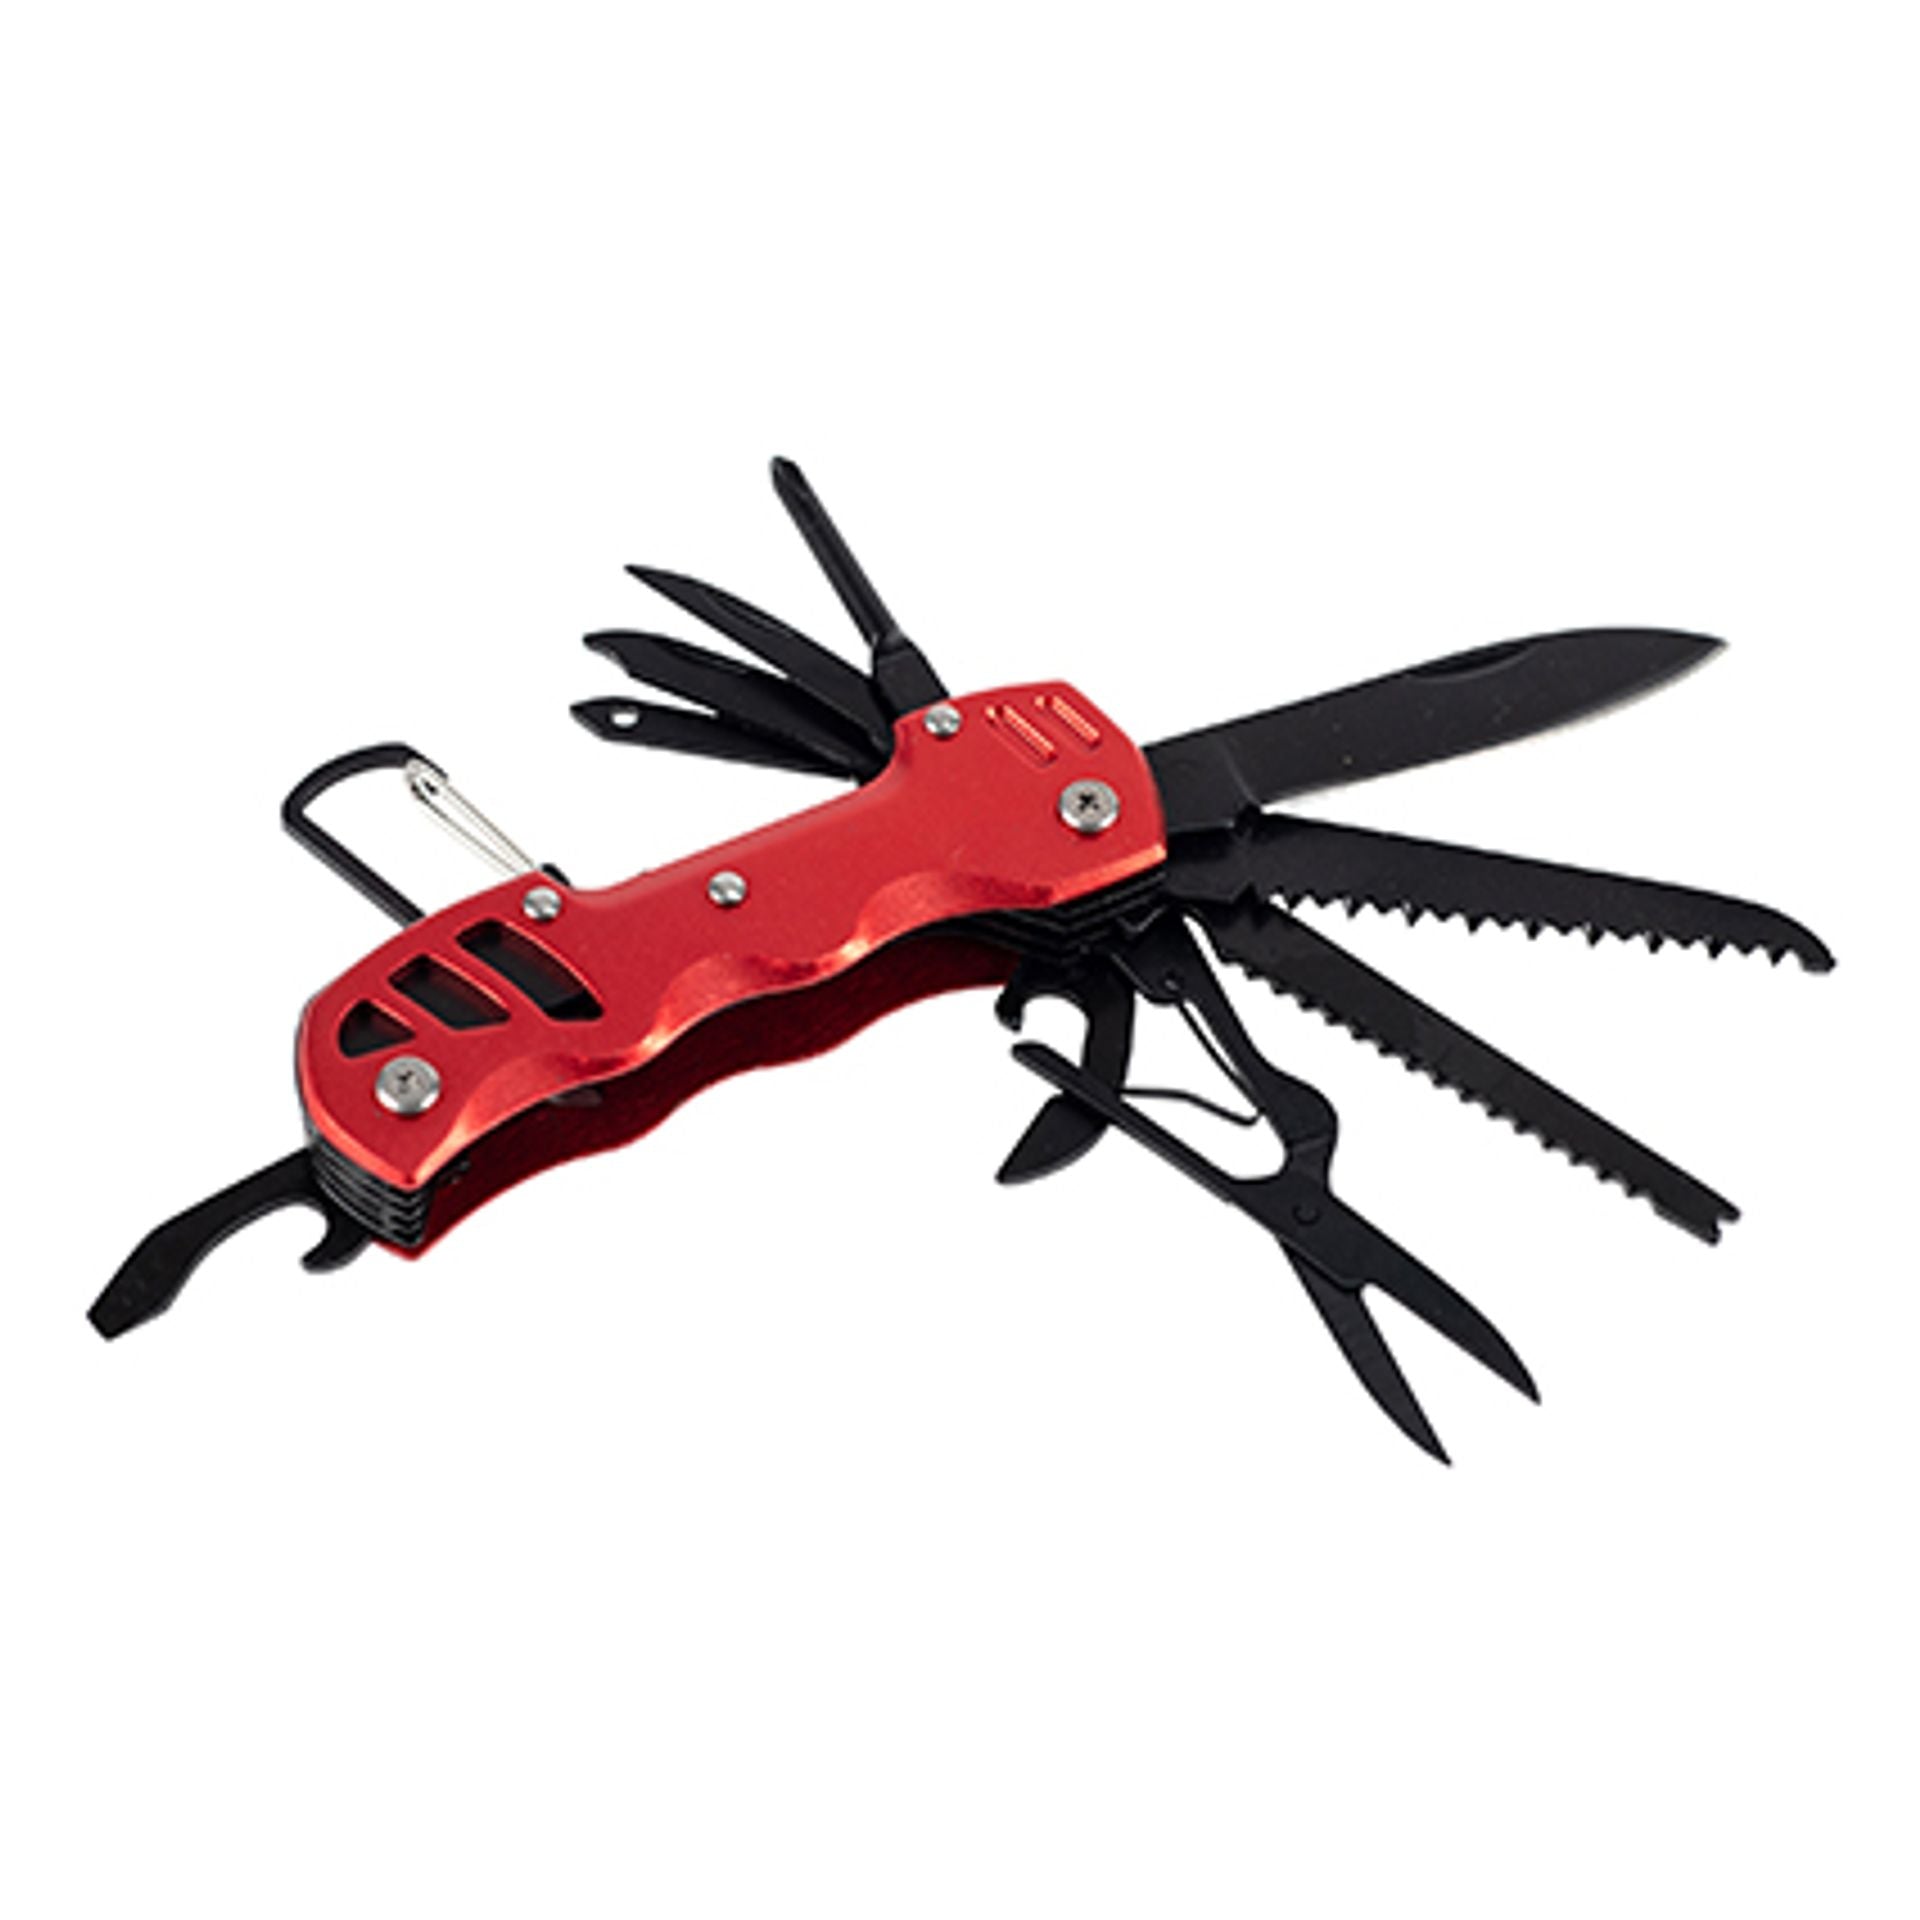 Mad Man Trail Mate 12 in 1 Multi Function Pocket Tool - Red